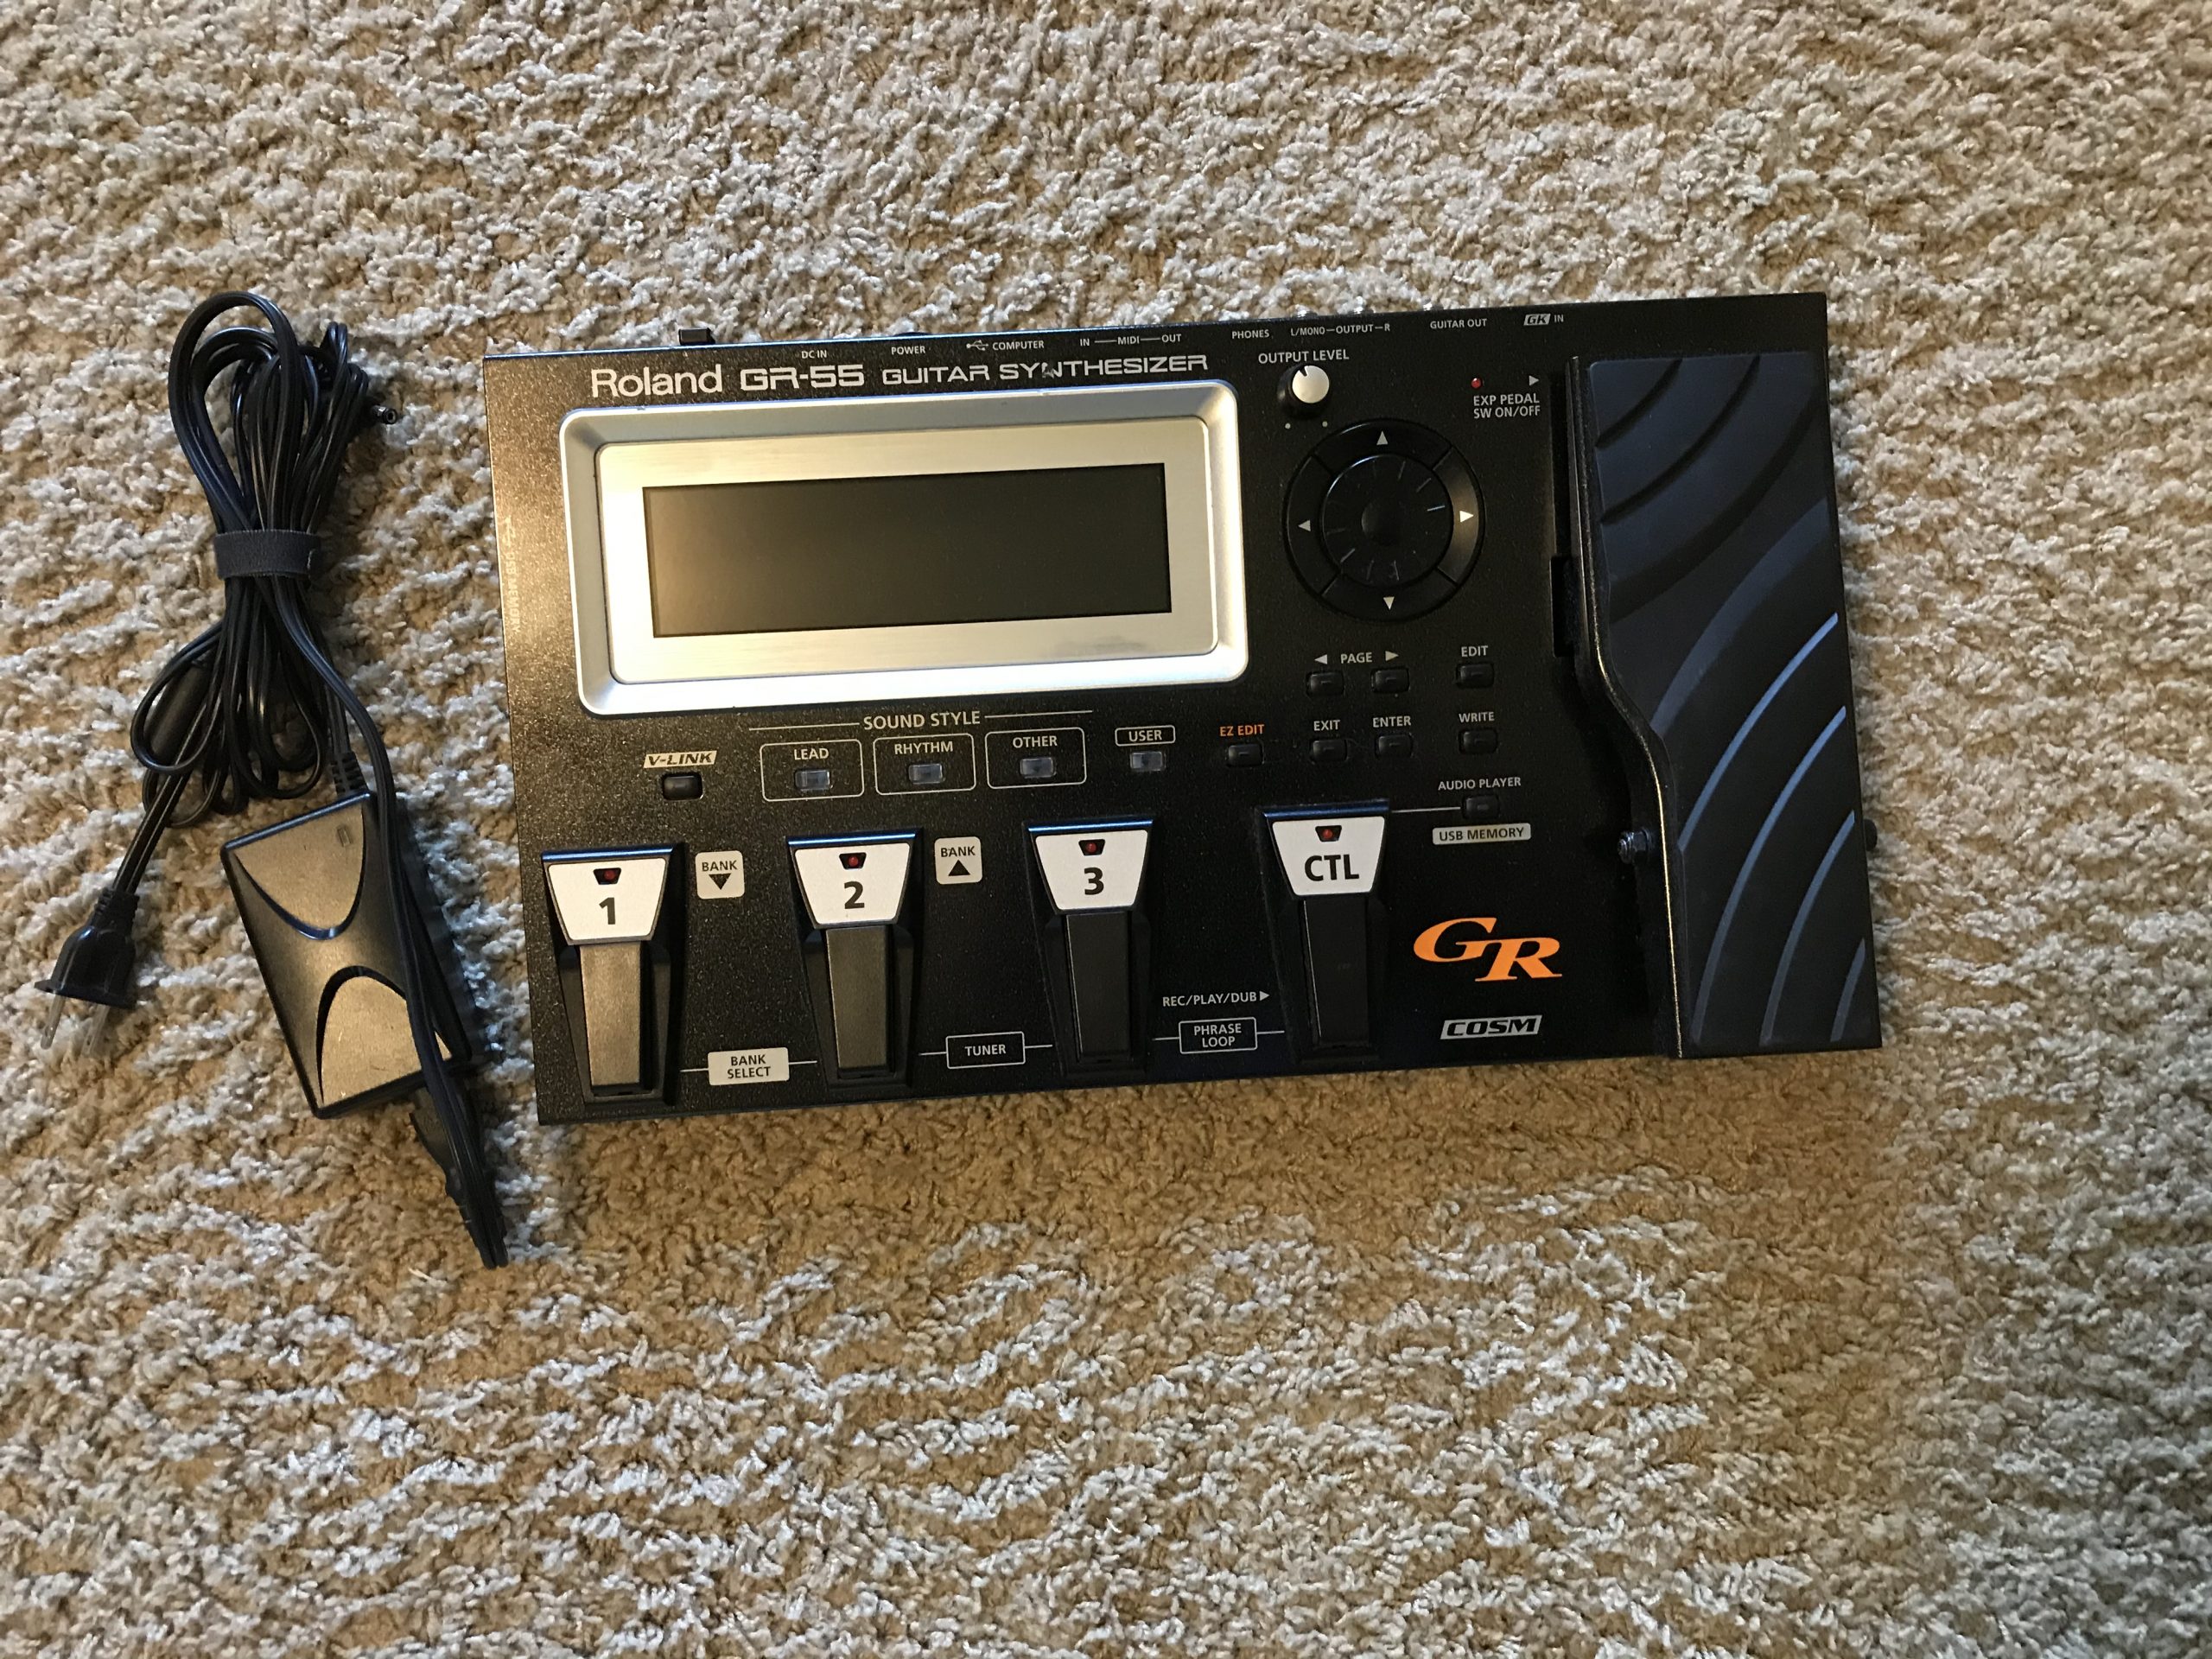 Roland GR-55 Guitar Synthesizer Multi Effect Unit in excellent